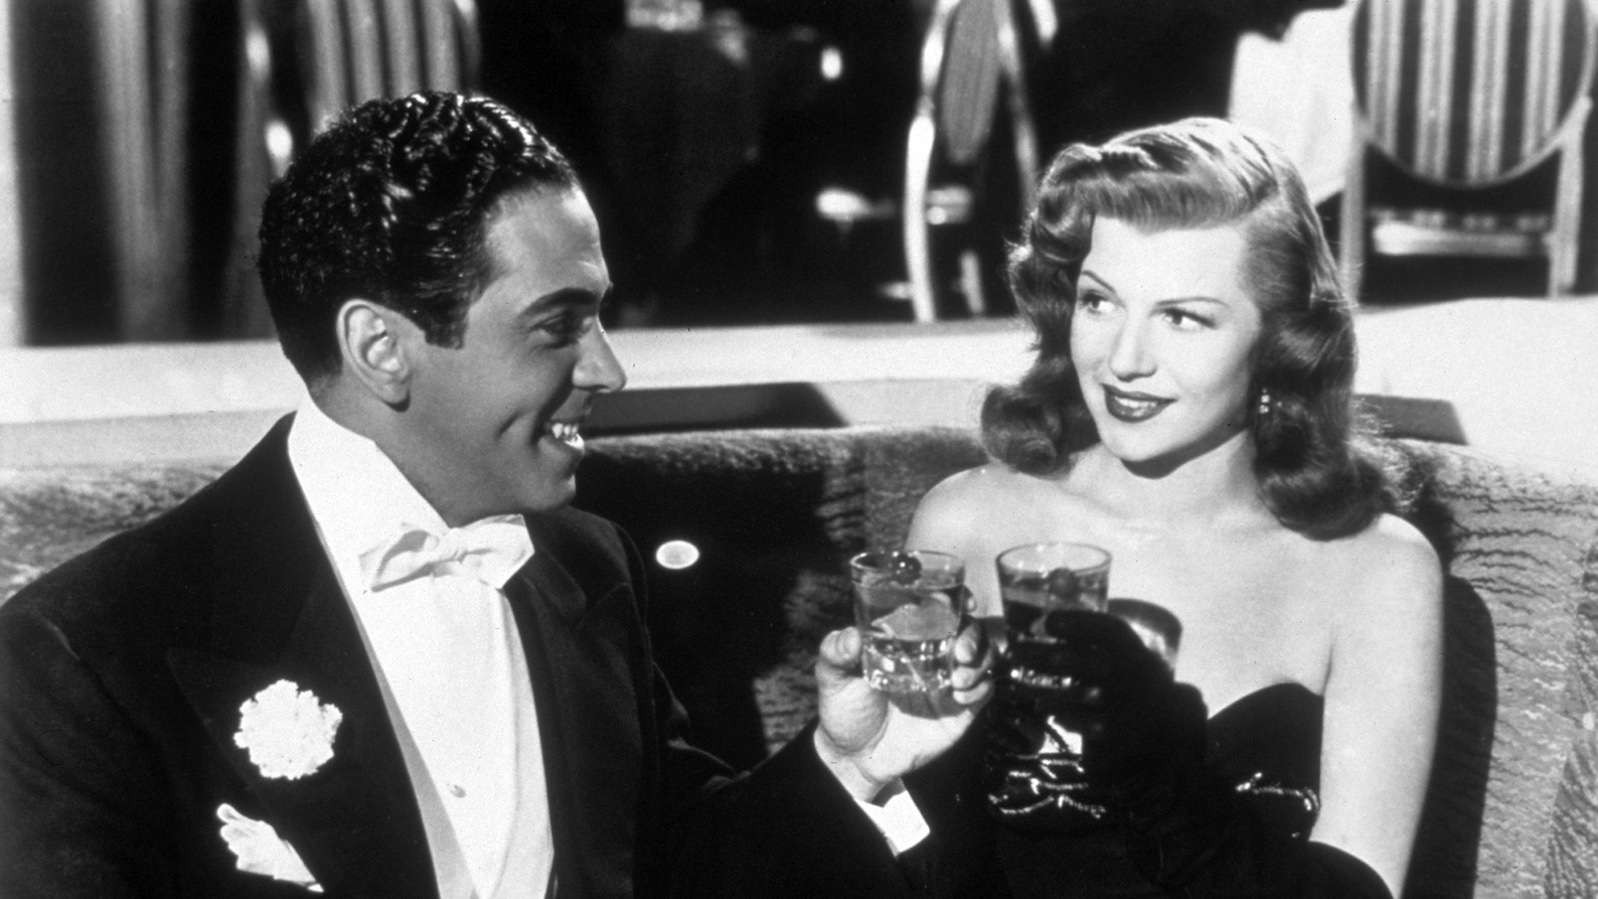 A man in a tux and a woman in a black, sleeveless dress toast glasses in a fancy restaurant in a black and white image